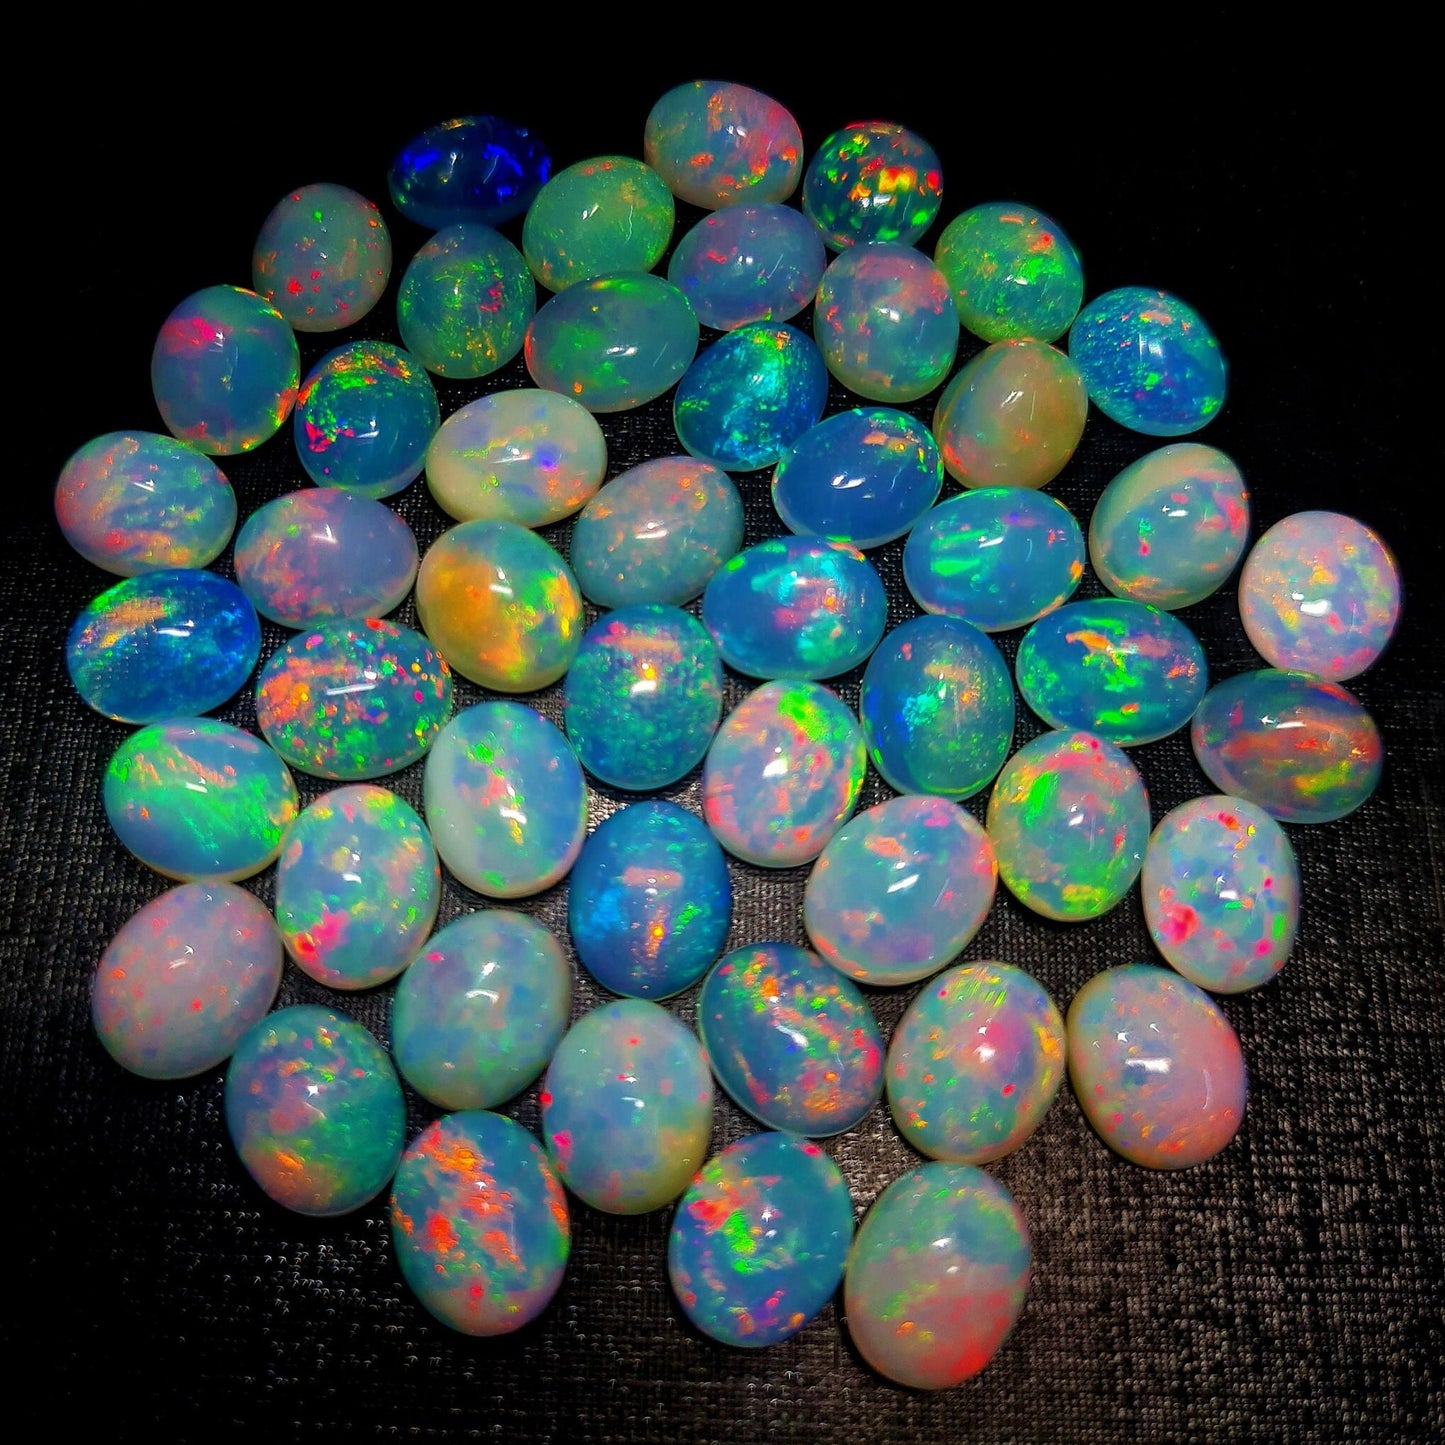 Amazing Multi Play fire Ethiopian Opal 9x11 mm Oval Gemstone Cabochon, Calibrated Opal Stone, Natural Fire Opal Loose Stone For Jewelry Making. (Natural)